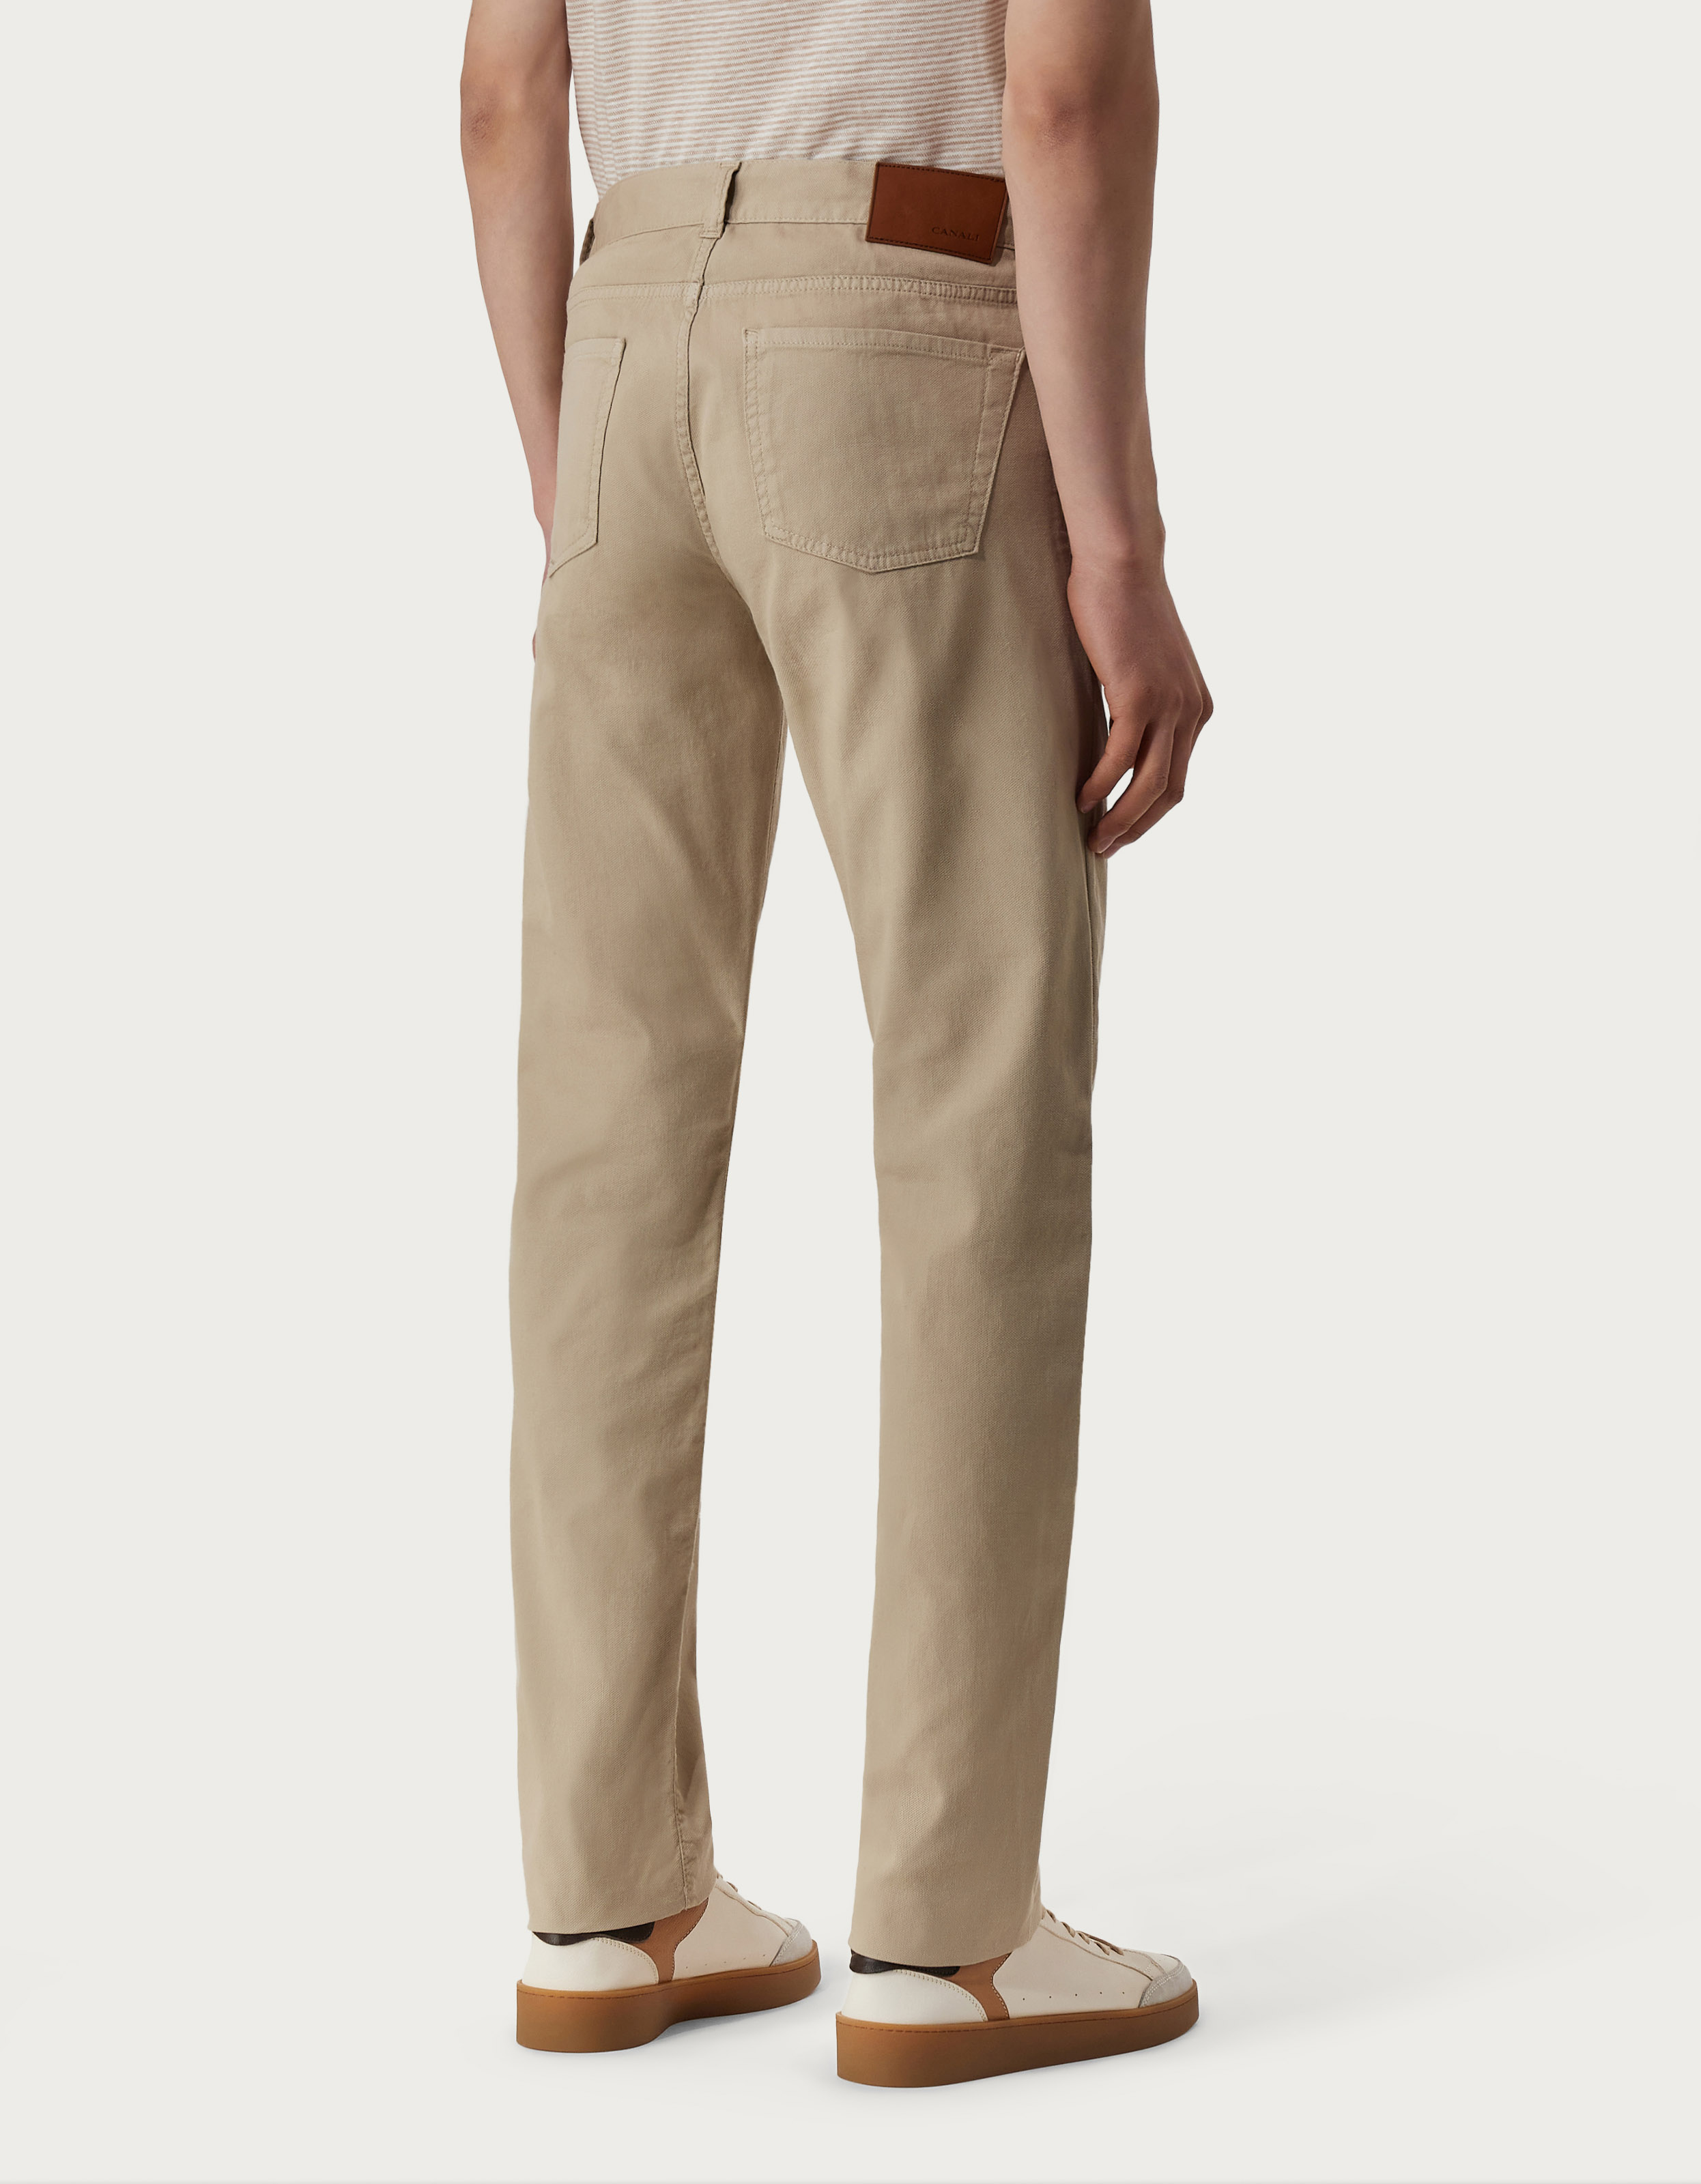 Five-pocket pants in sand cotton microtwill - Canali US